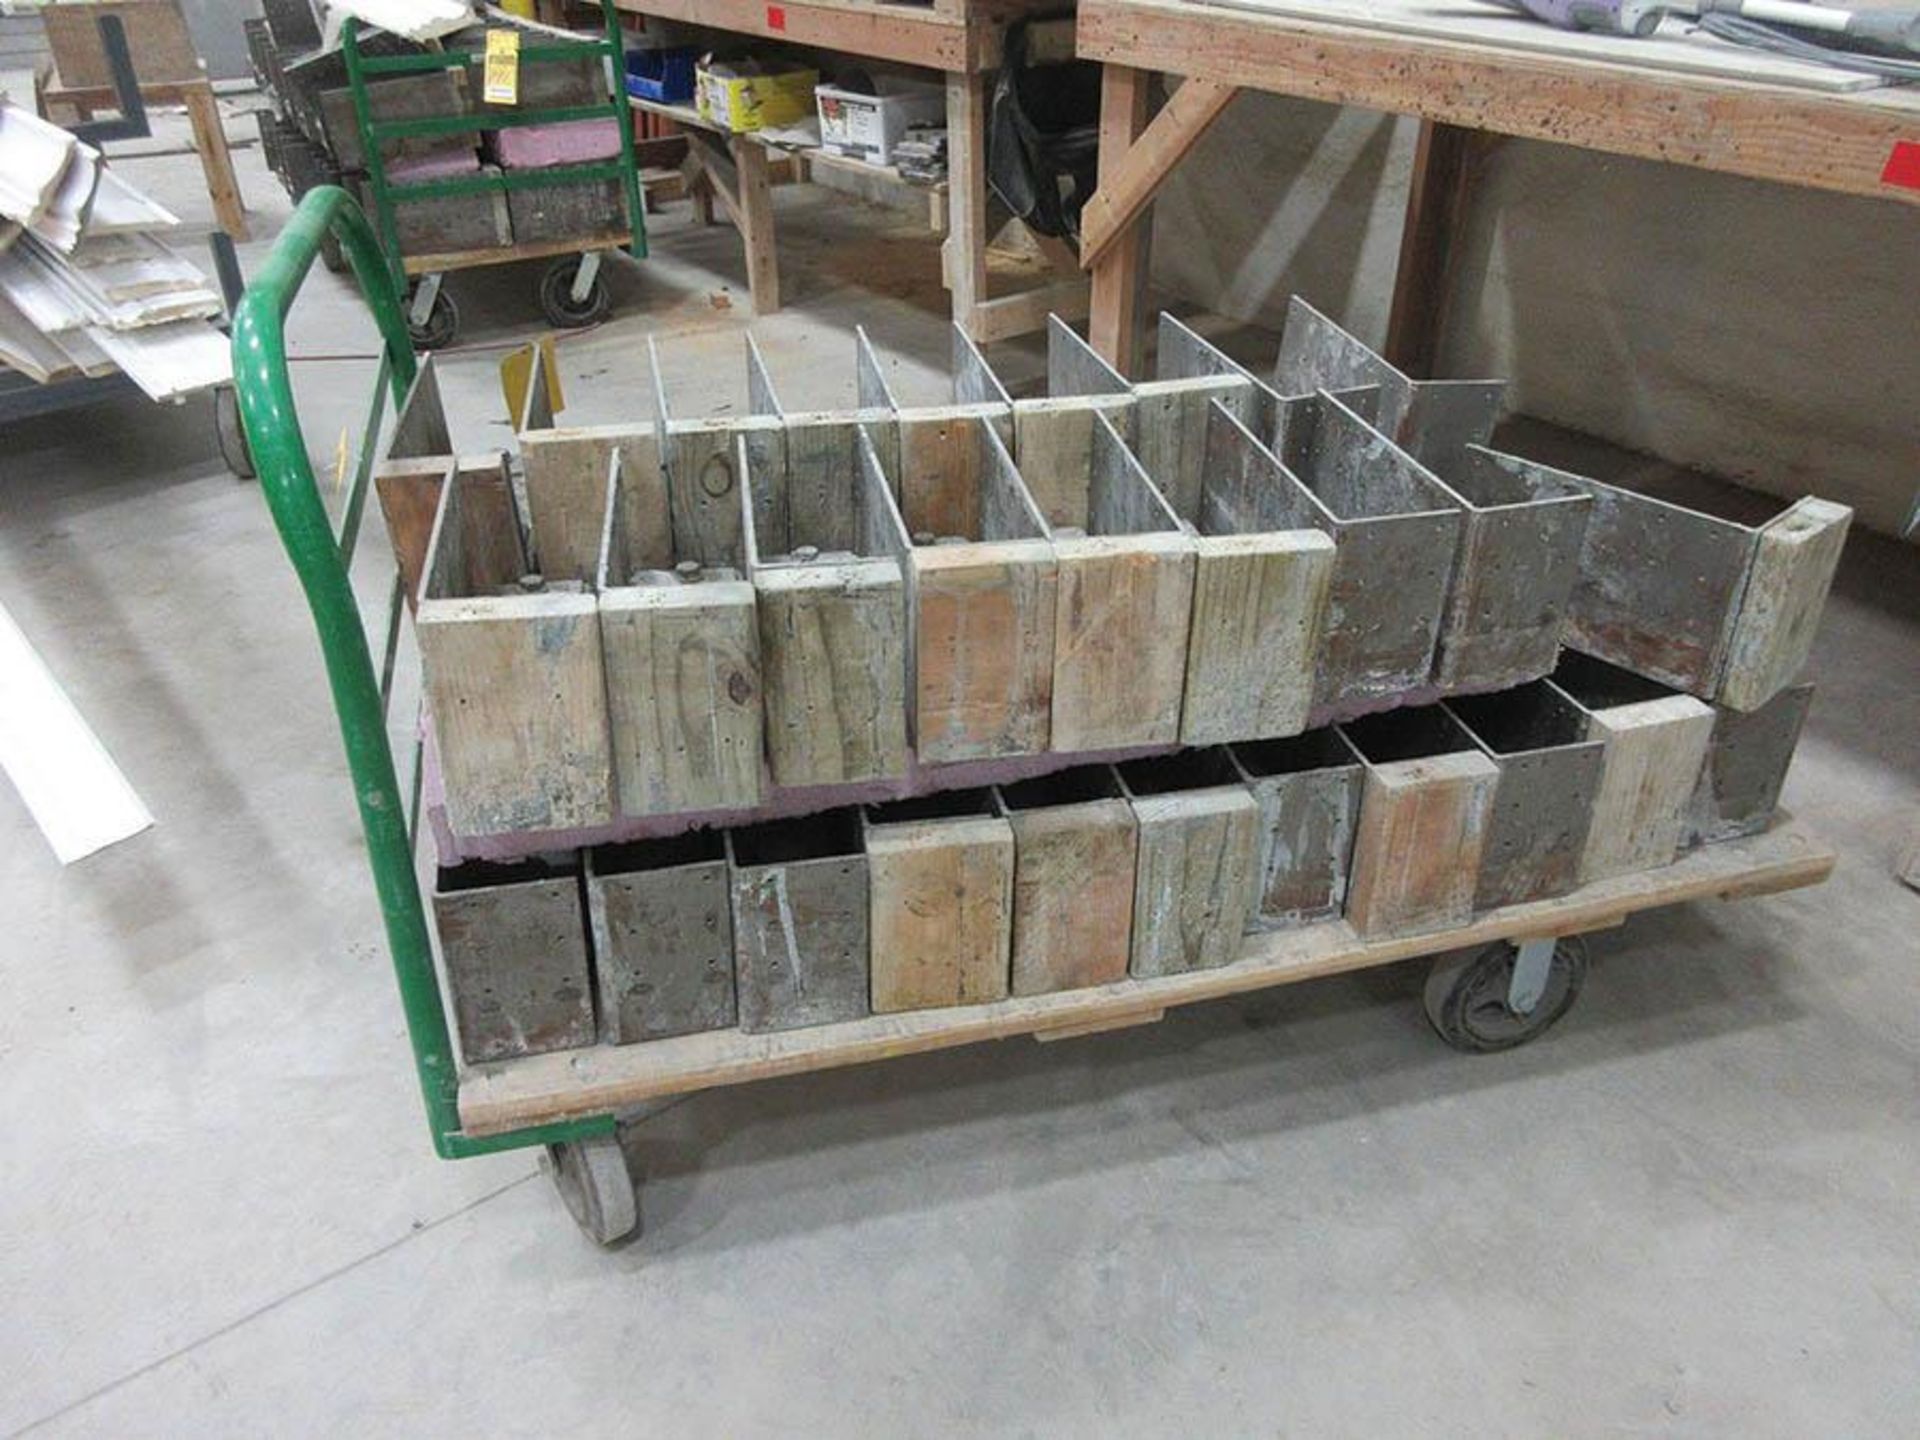 ULINE STOCK CART (FORMS NOT INCLUDED) - Image 2 of 2